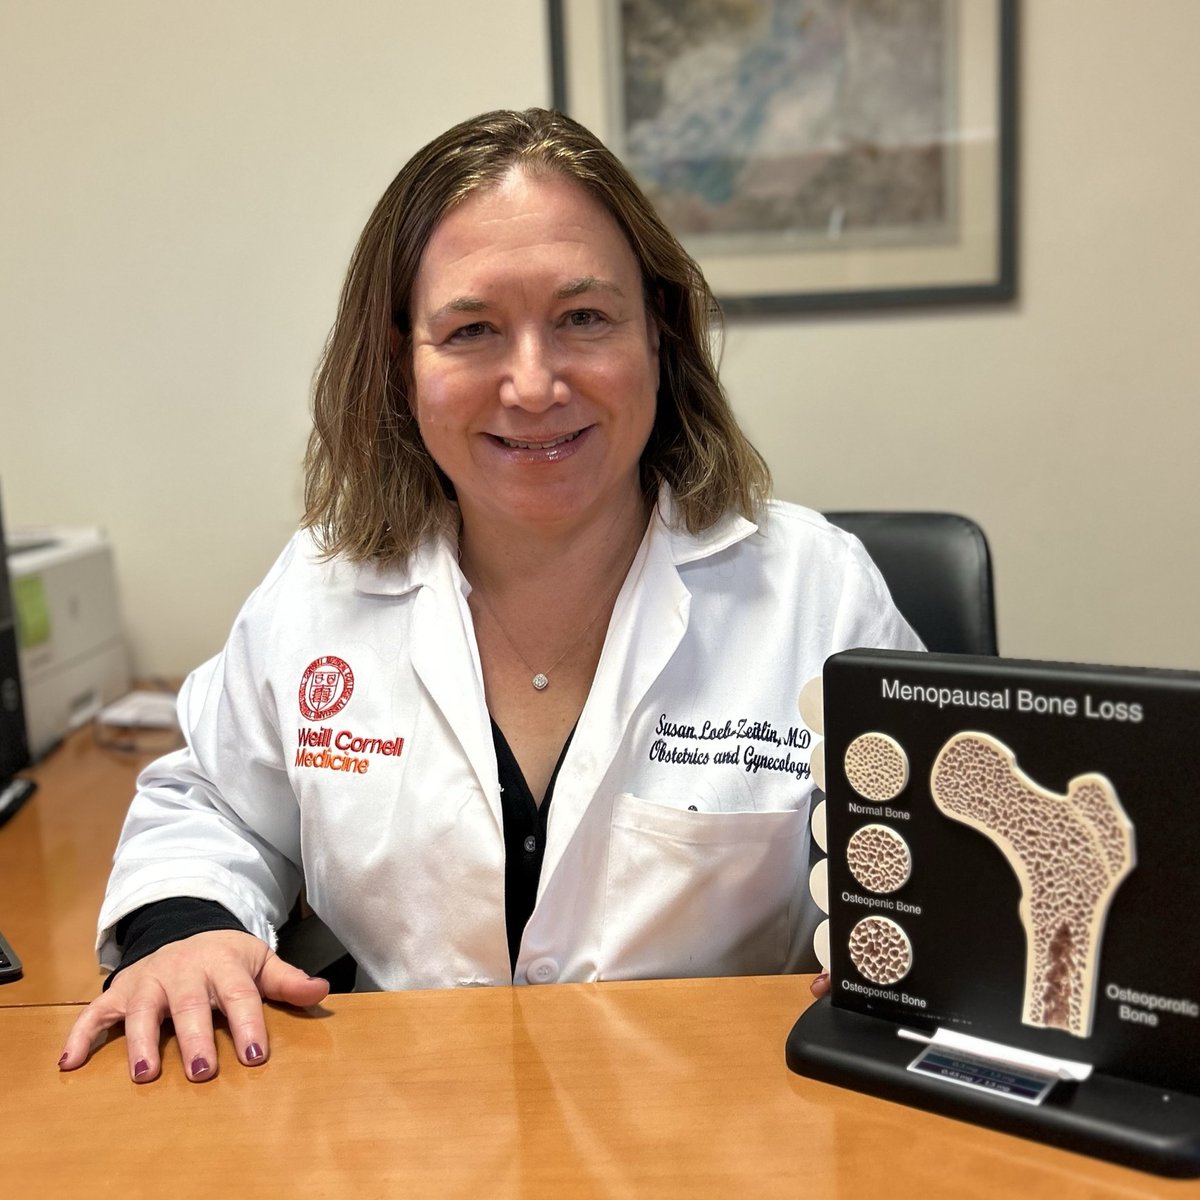 It's #NationalWomensHealthWeek and this year's @US_FDA theme is 'Know Your Bones,' to empower women to take charge of their bone health. This can be especially important in the menopause transition. Learn more about our Women's Midlife Center at the link in our bio! #obgyn